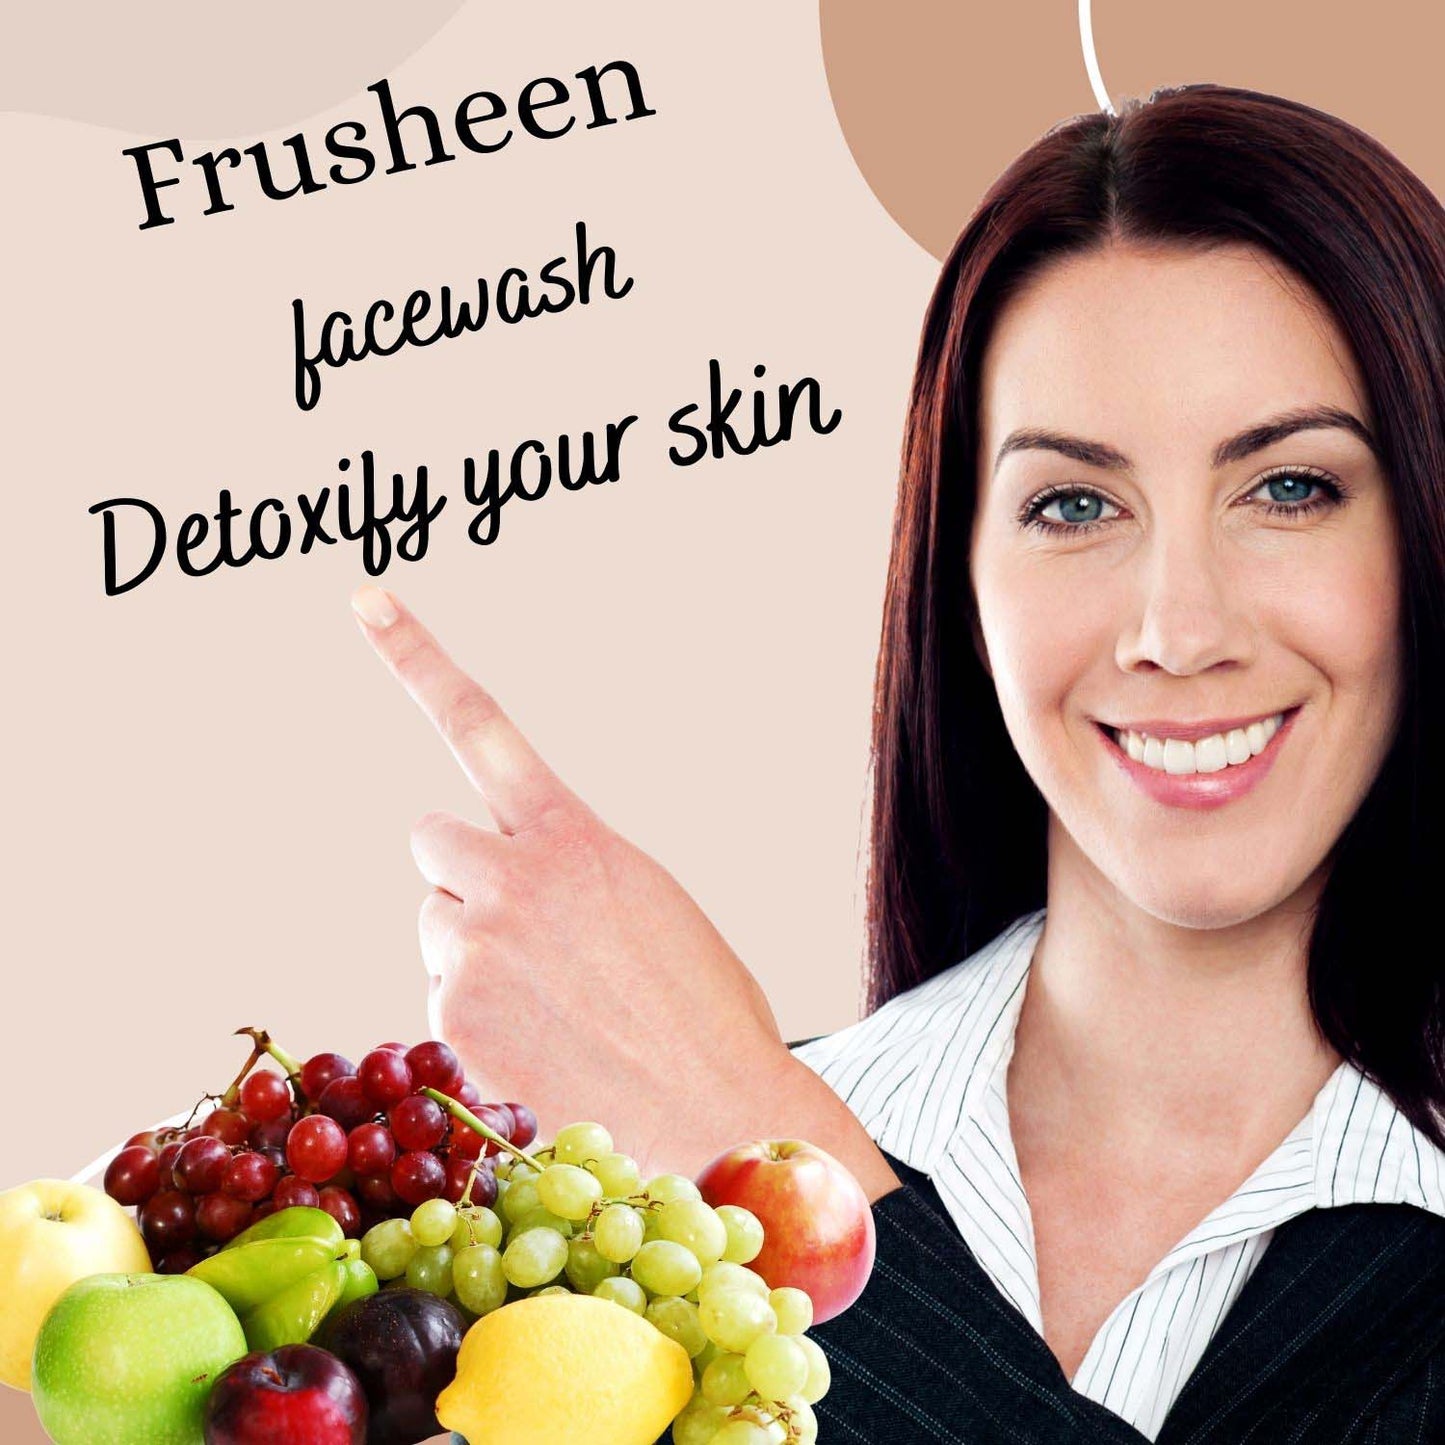 urbaano herbal frusheen face wash full of natural & pure extracts . oils, no chemical, sulphates, parabens